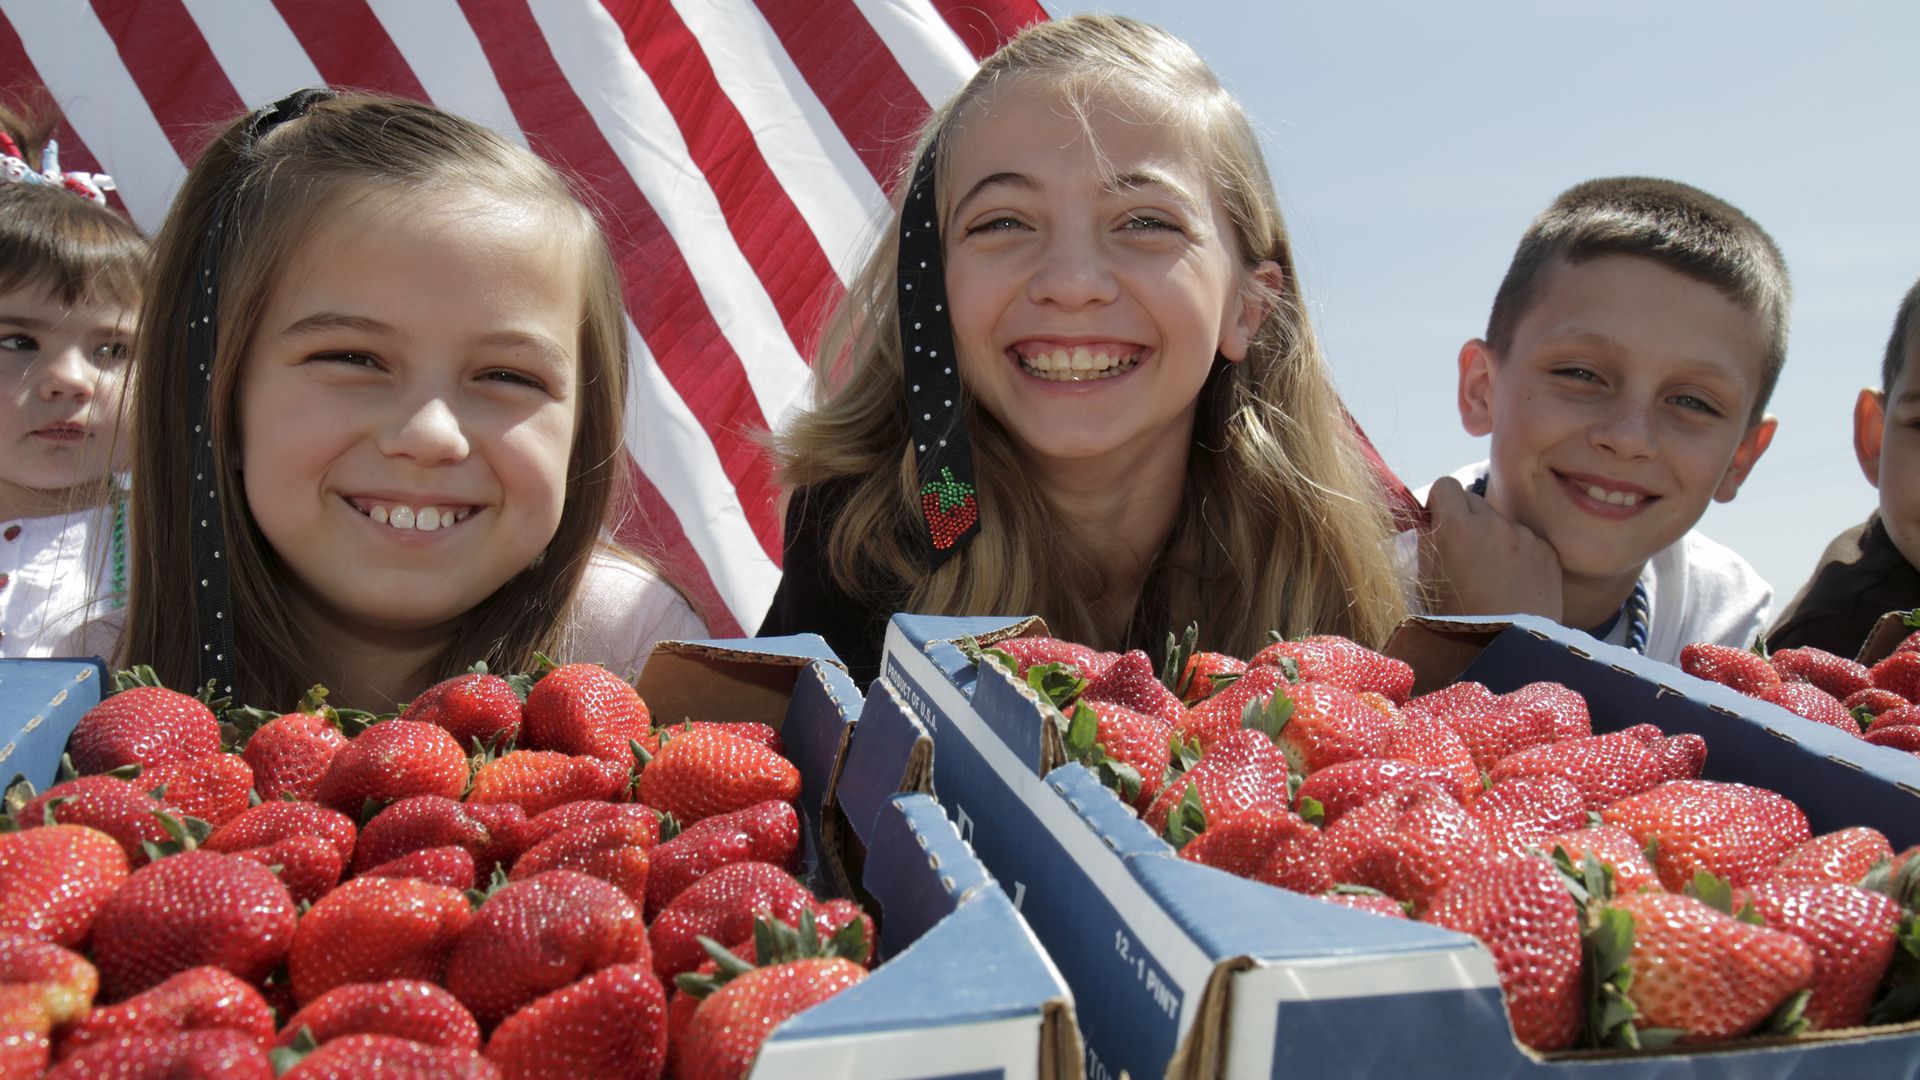 smiling children behind crates of strawberries with an american flag in the baground